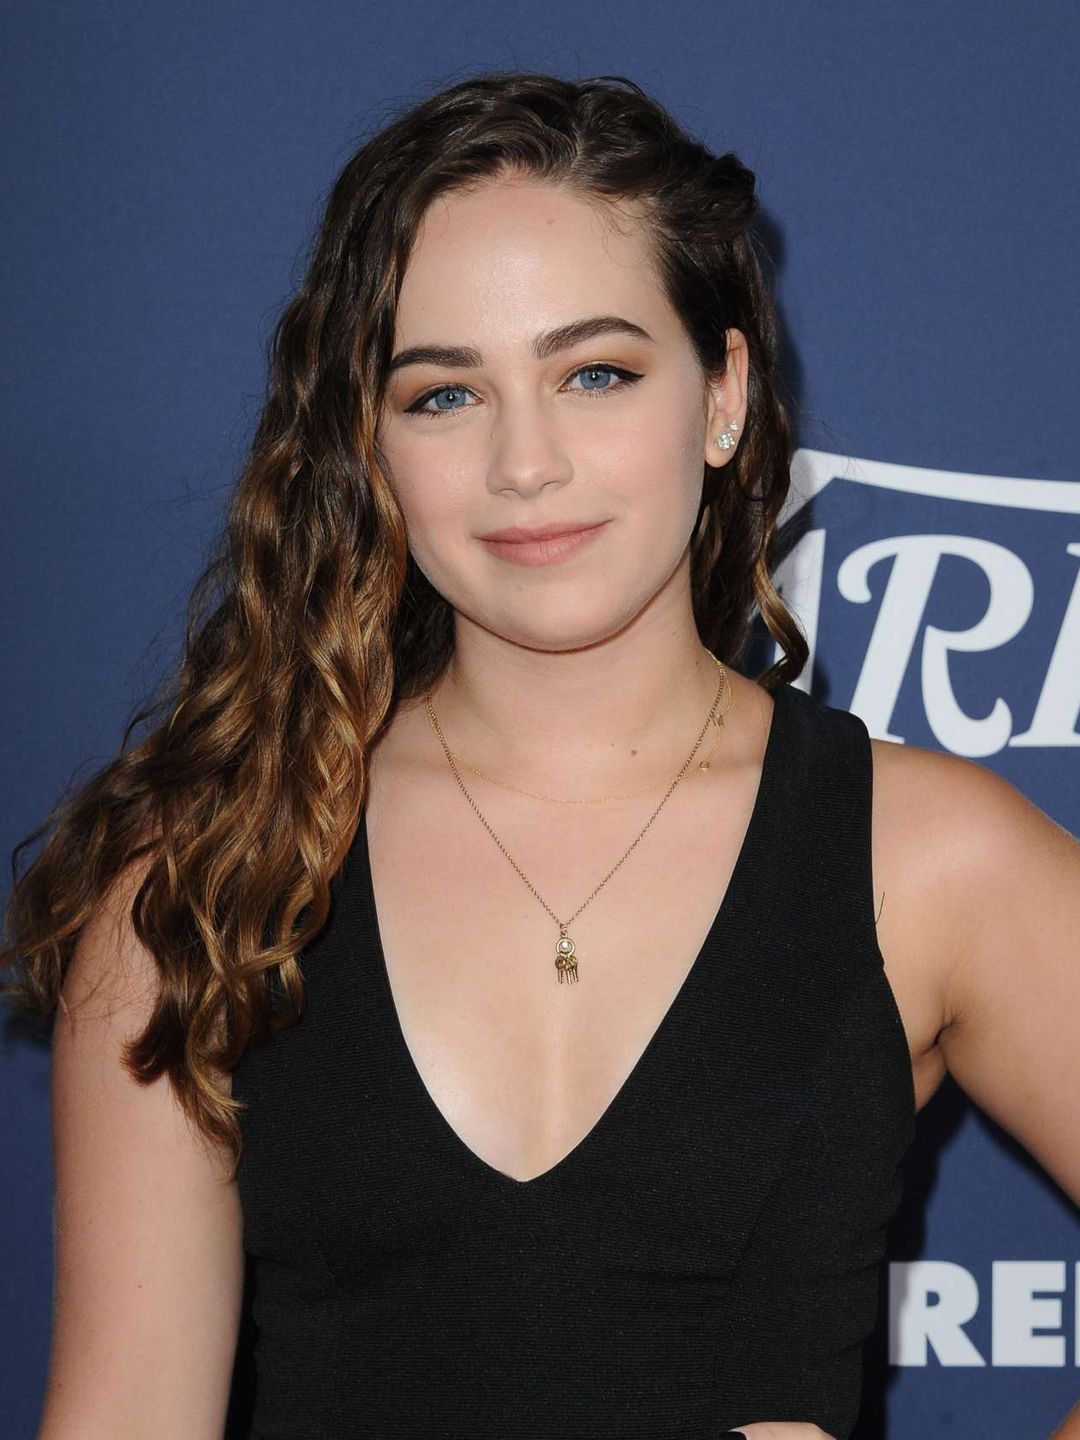 Mary Mouser young age